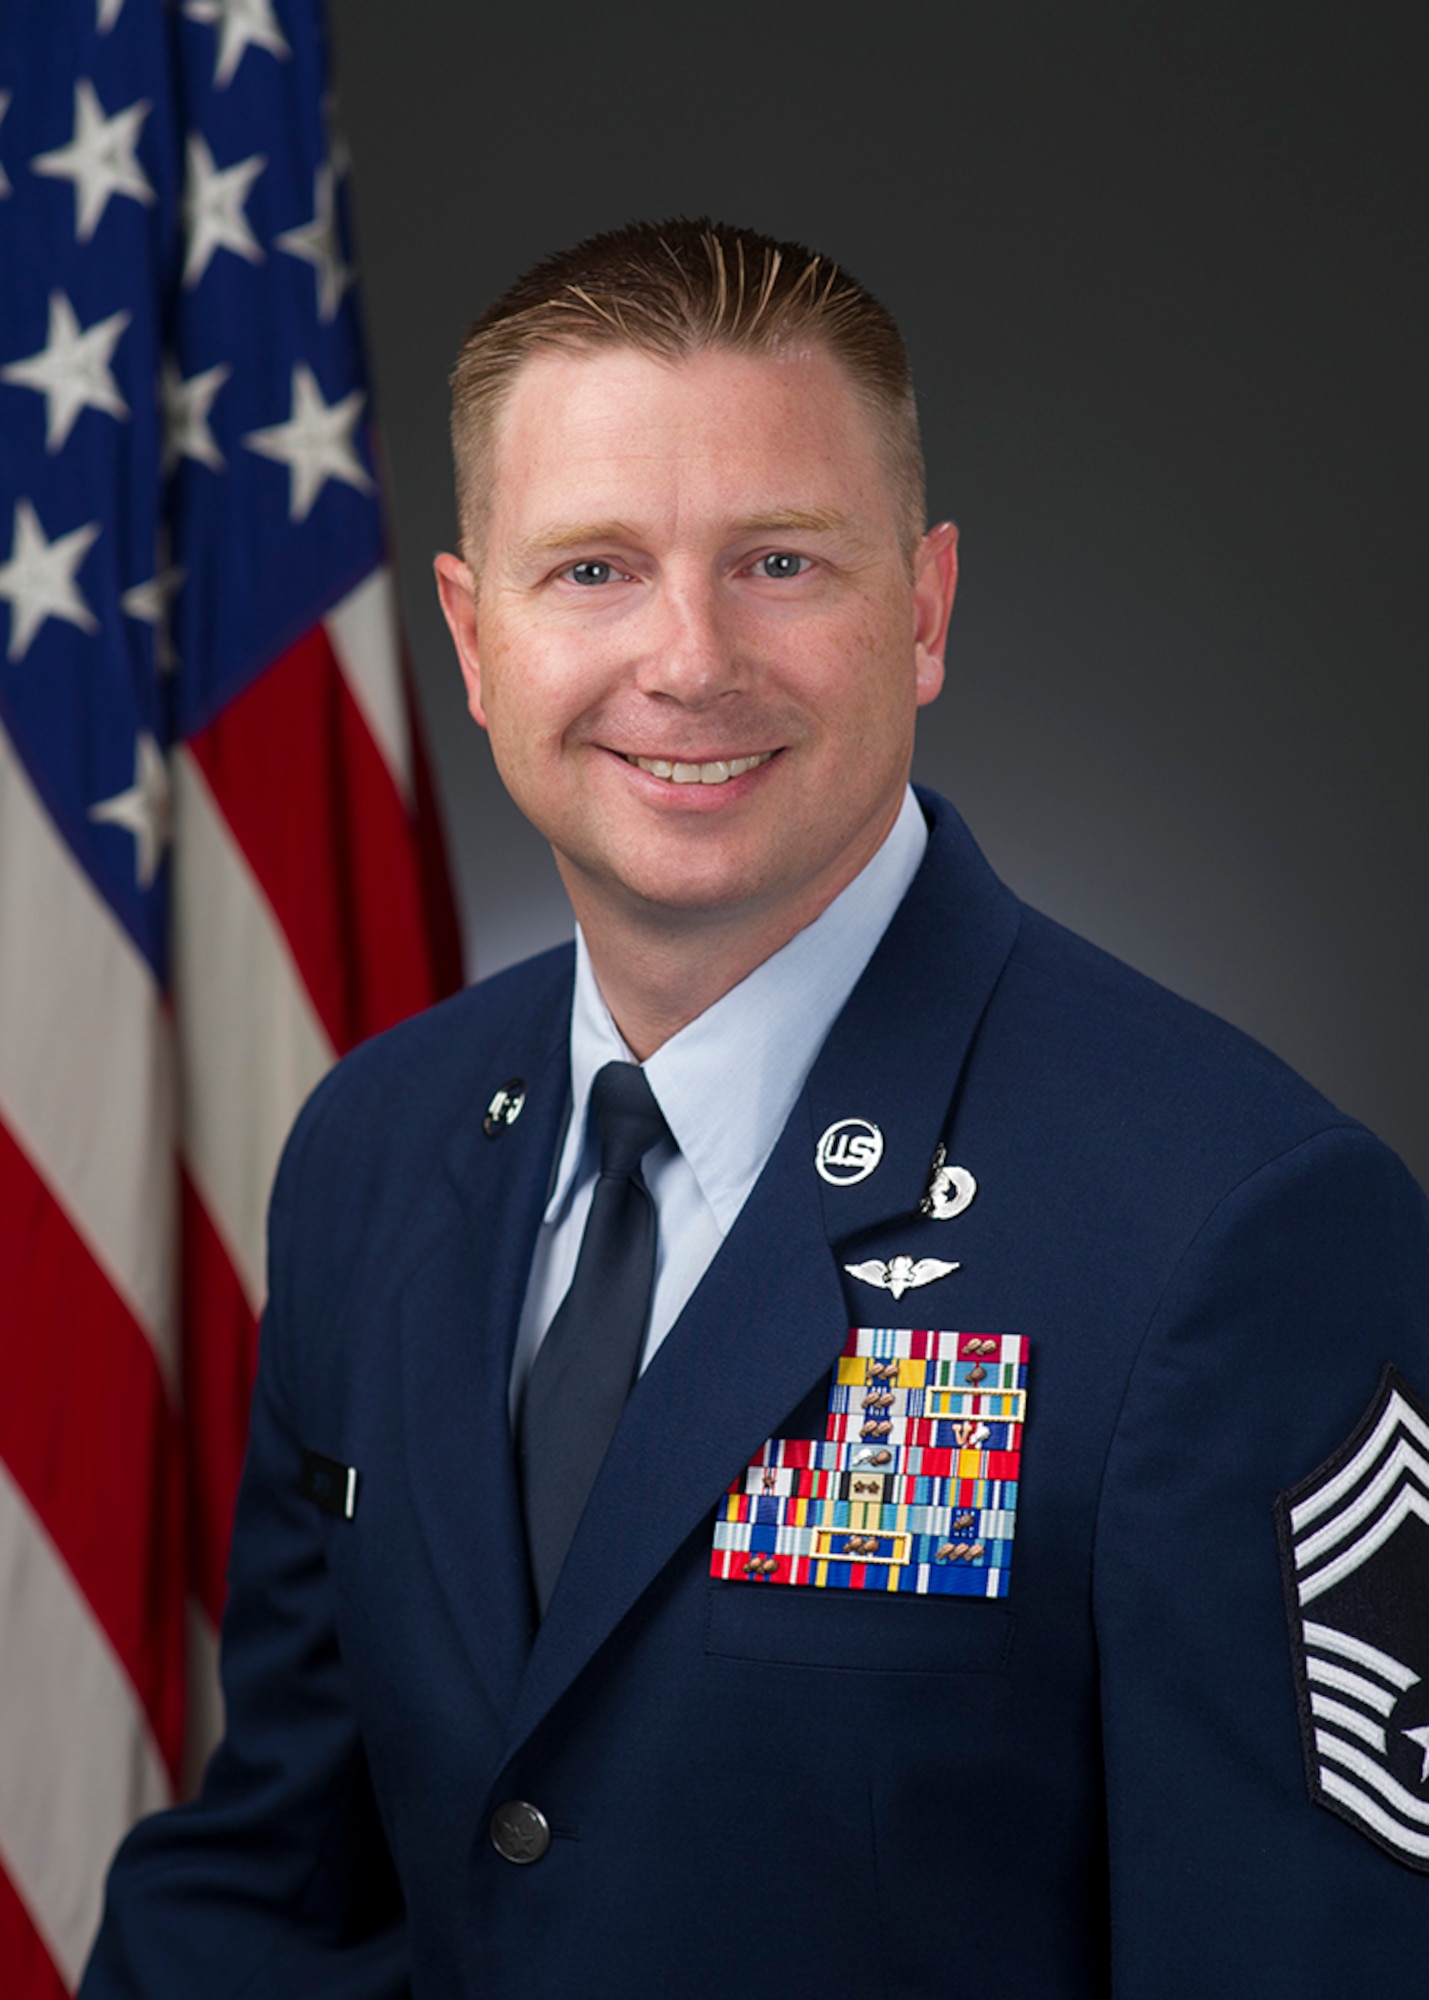 Chief Master Sgt. Ricky Smith, official photo, U.S. Air Force